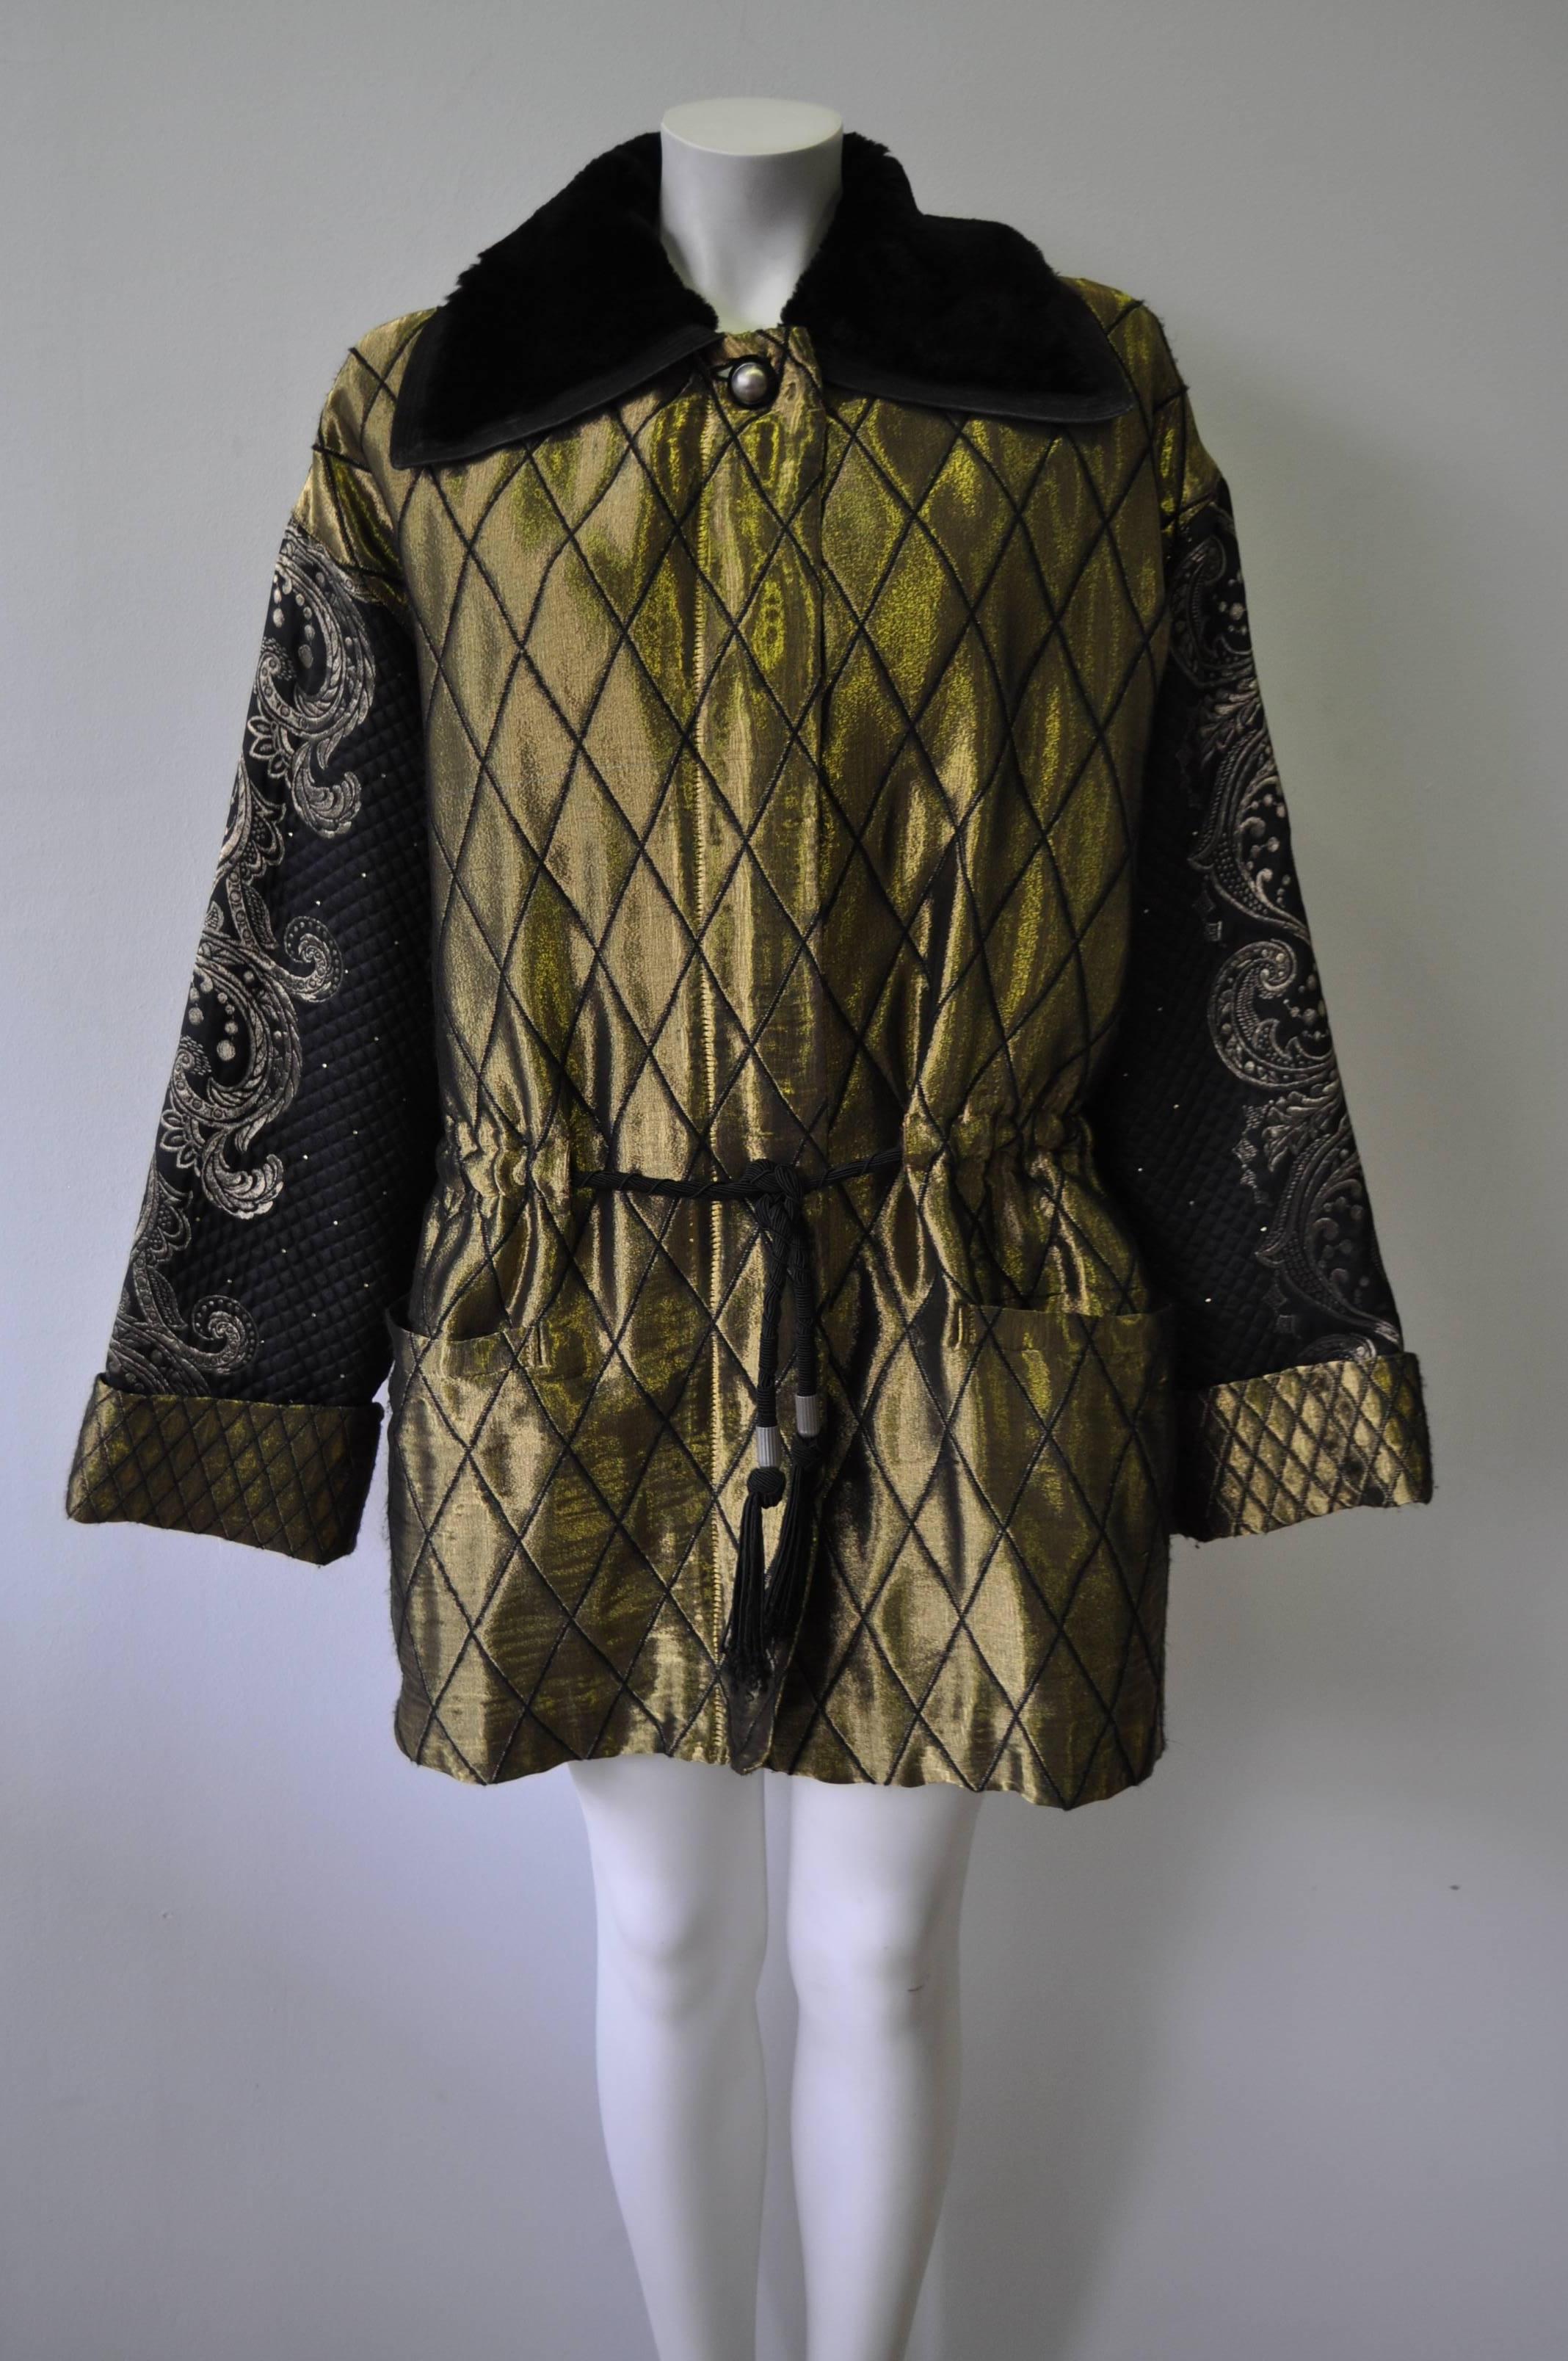 Rare, Warm and Iconic Gianni Versace Silk Metallic Embroidered Parka Jacket,
Fall 1990